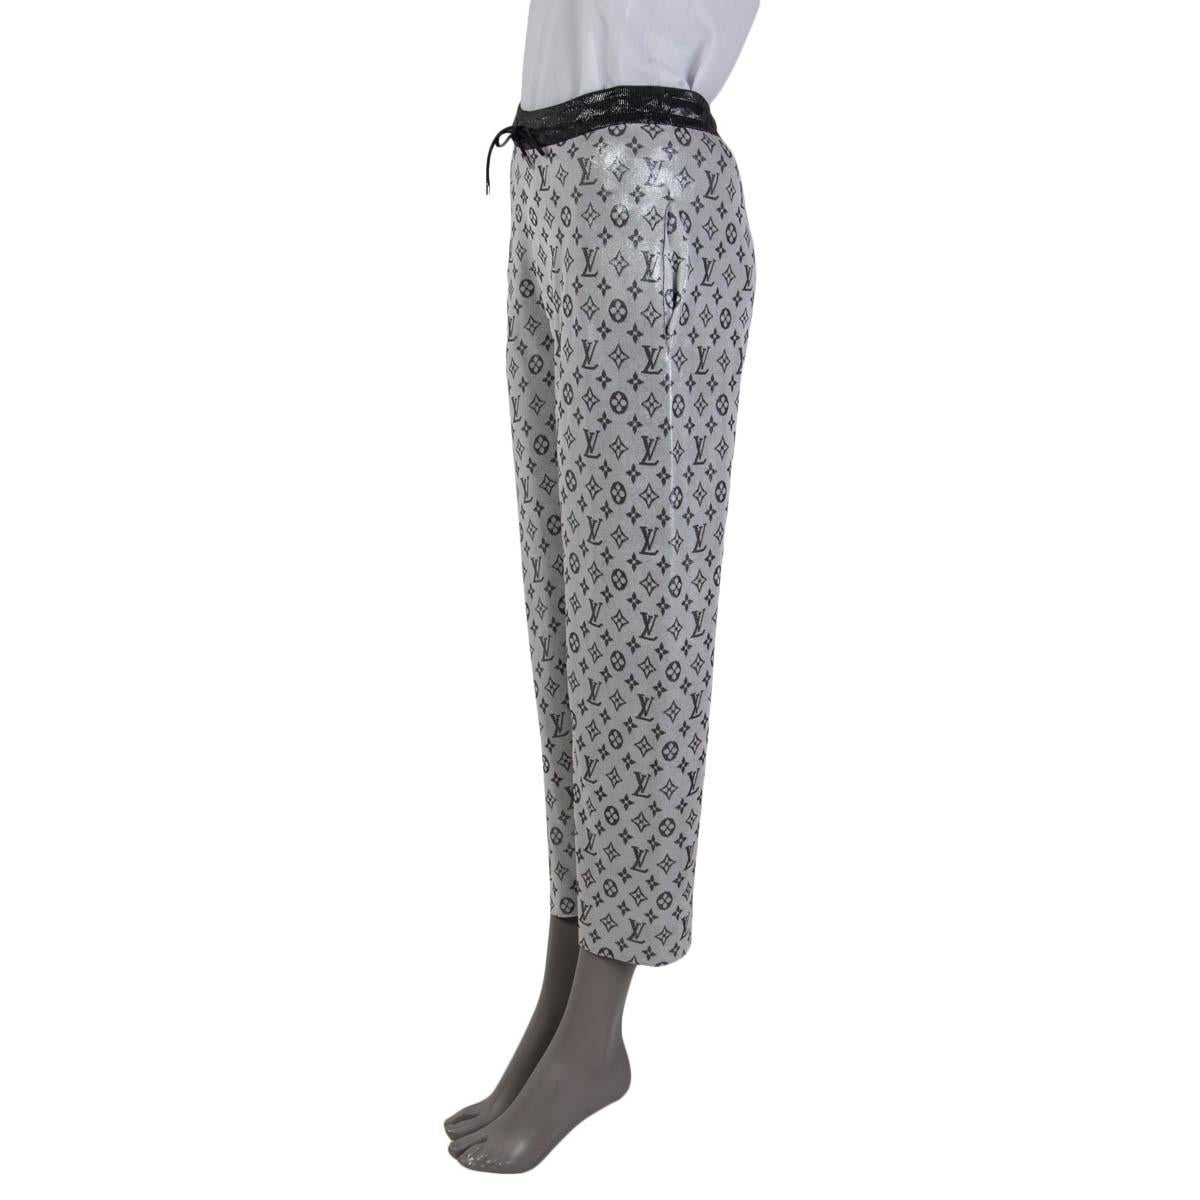 100% authentic Louis Vuitton monogram print lurex knit pants in silver and gray silk (83%) and polyamide (17%). Feature two slit pockets on the side. Open with a drawstring on the front. Unlined. Have been worn and are in excellent